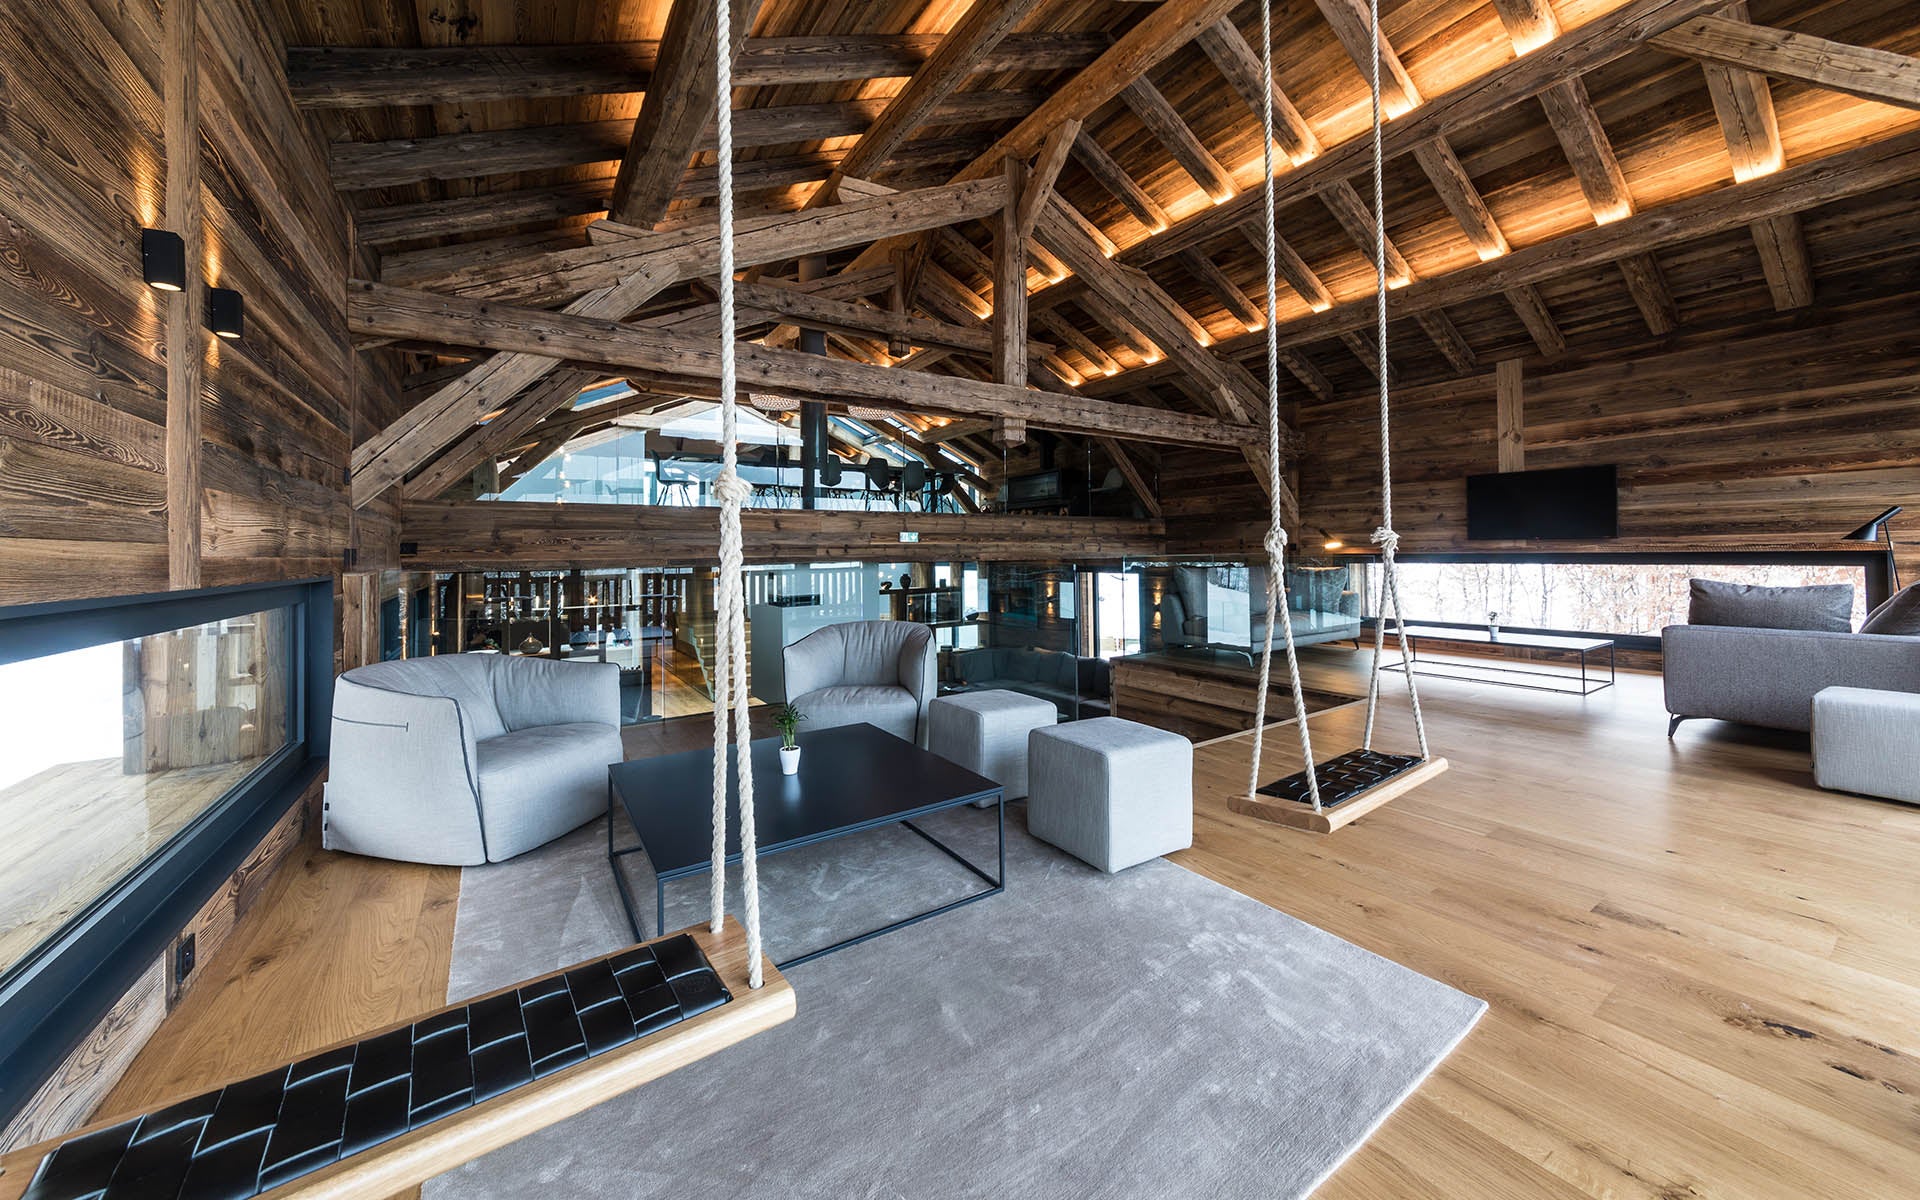 The 'adult swings' at Chalet Joux Plane